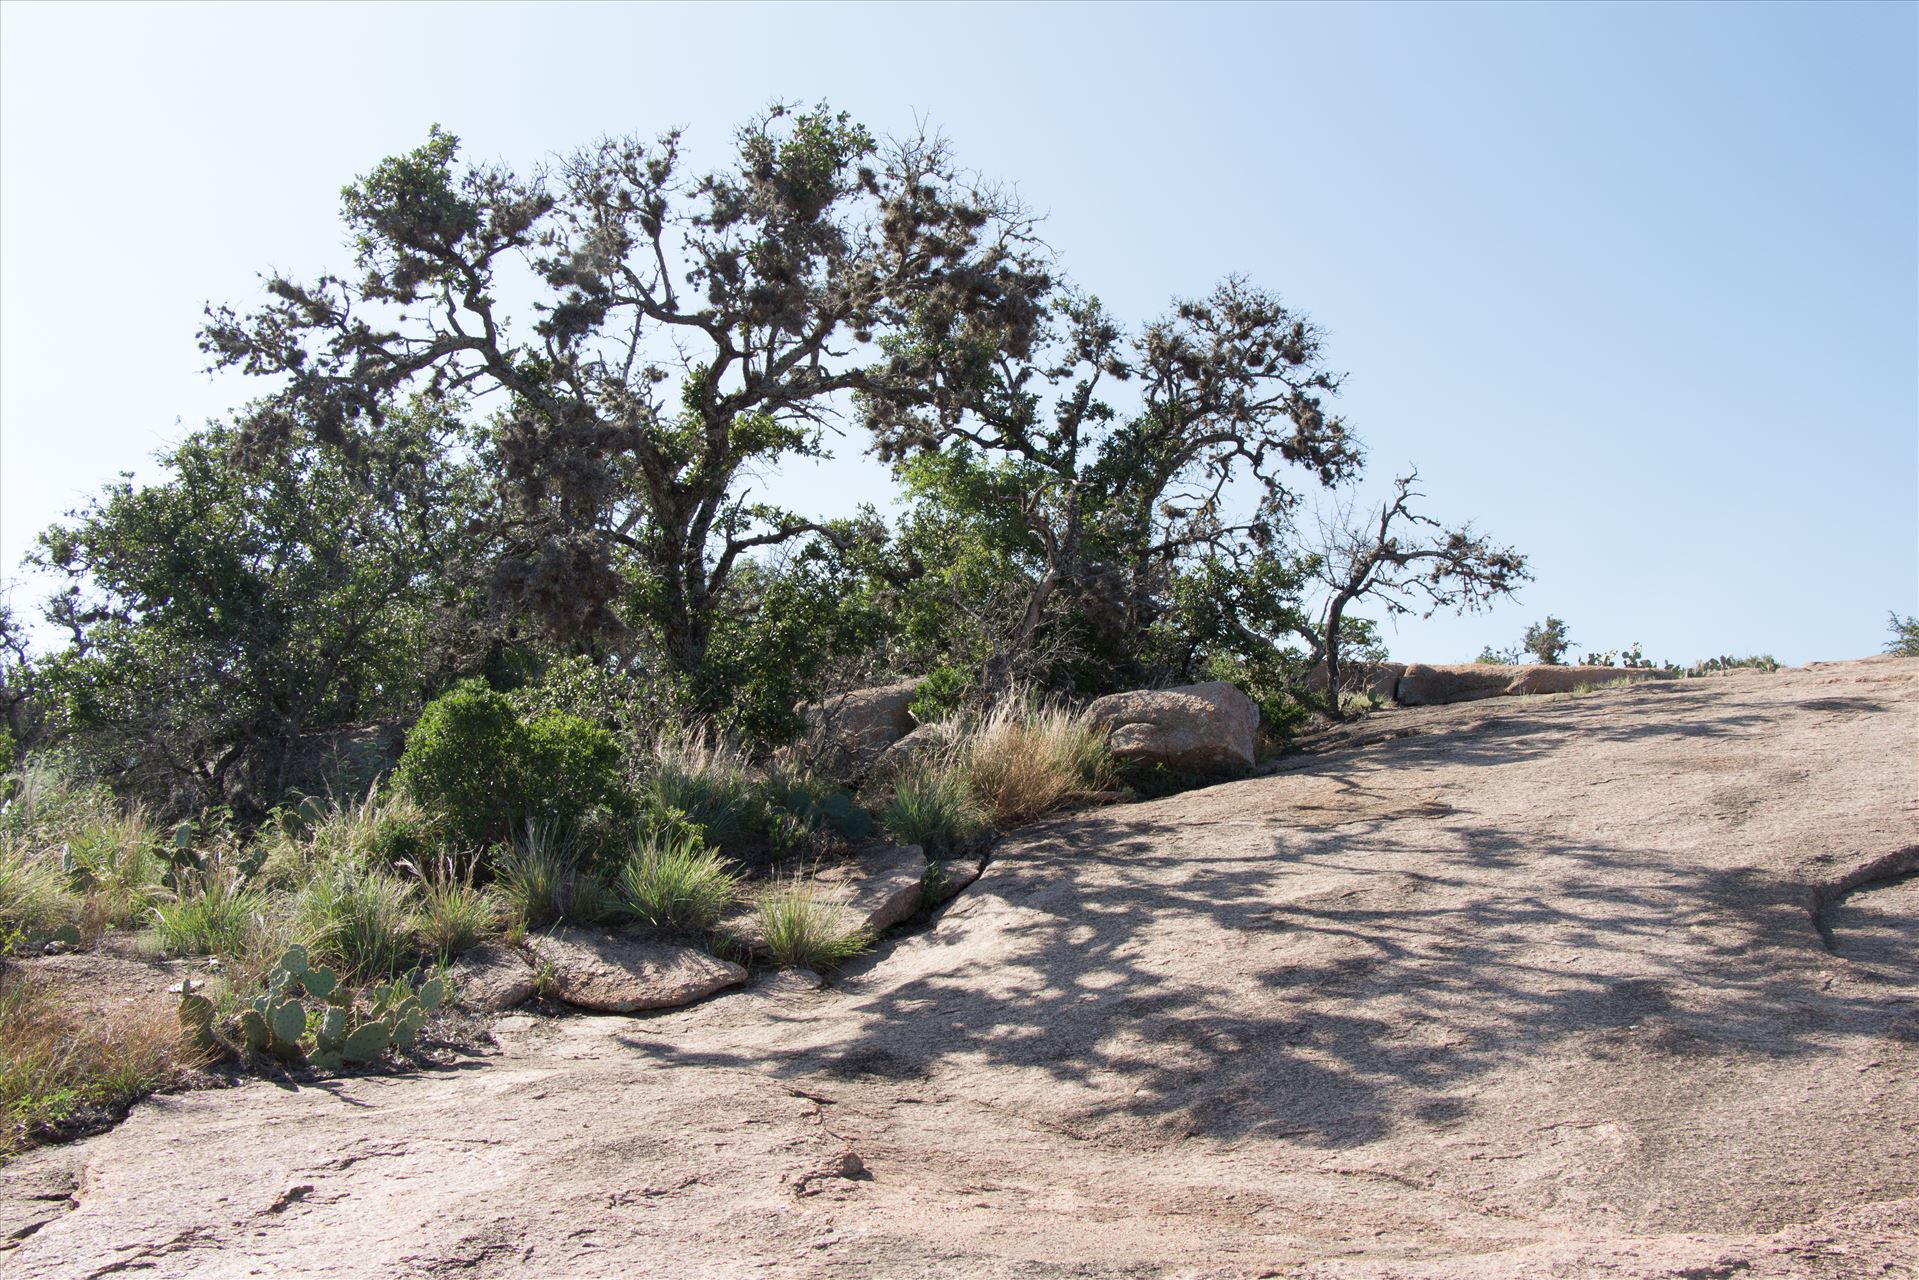 20130723-Enchanted Rock-DSLR-053.jpg -  by Charles Smith Photography